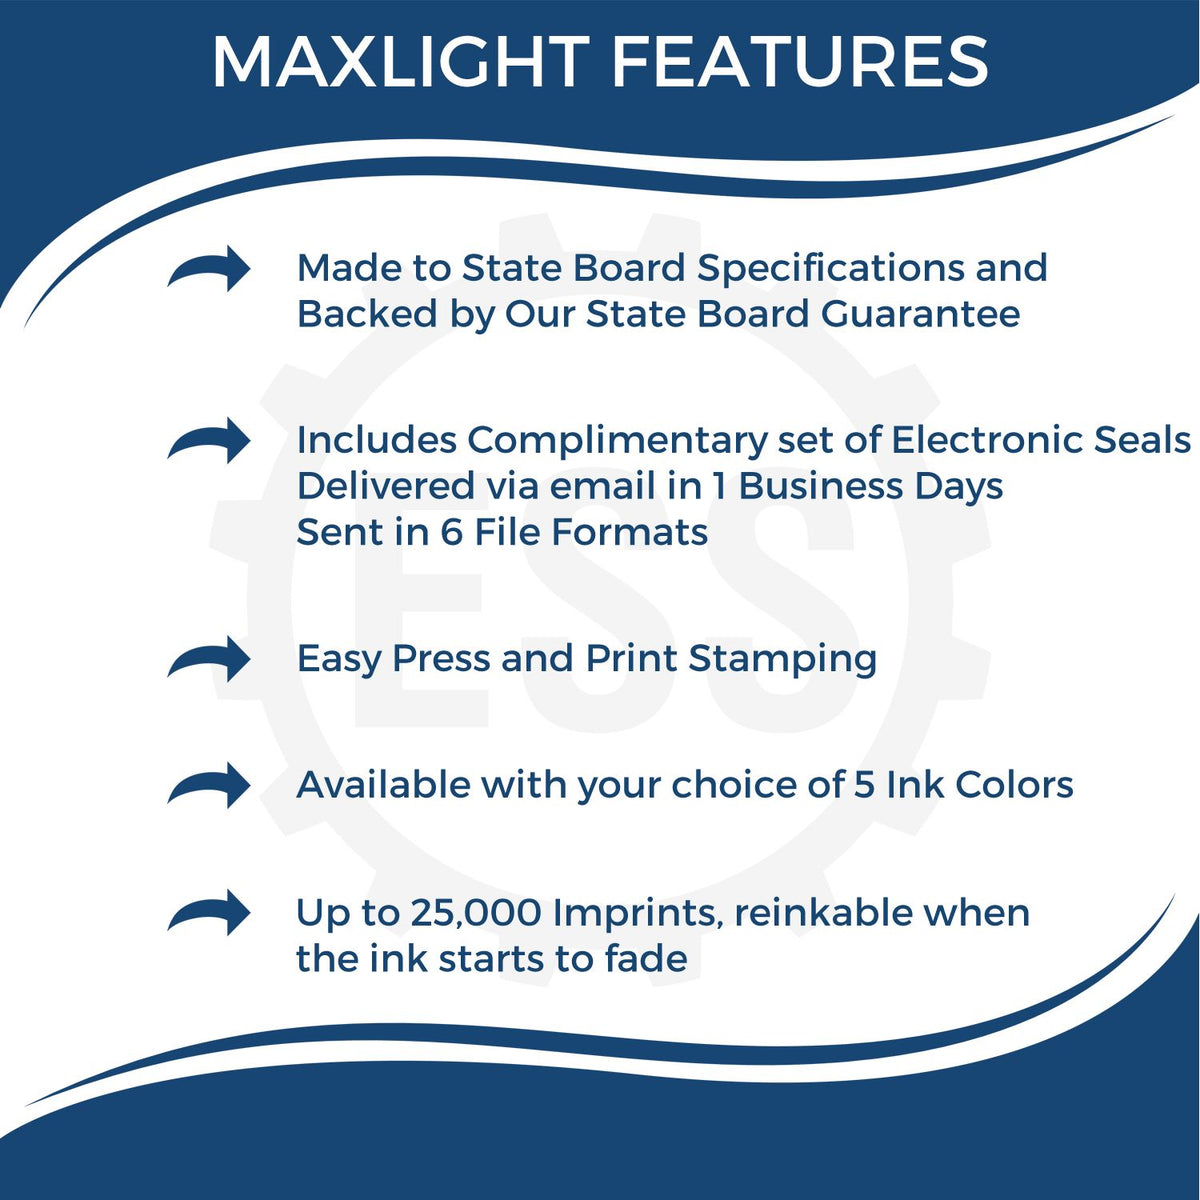 A picture of an infographic highlighting the selling points for the Premium MaxLight Pre-Inked Illinois Geology Stamp